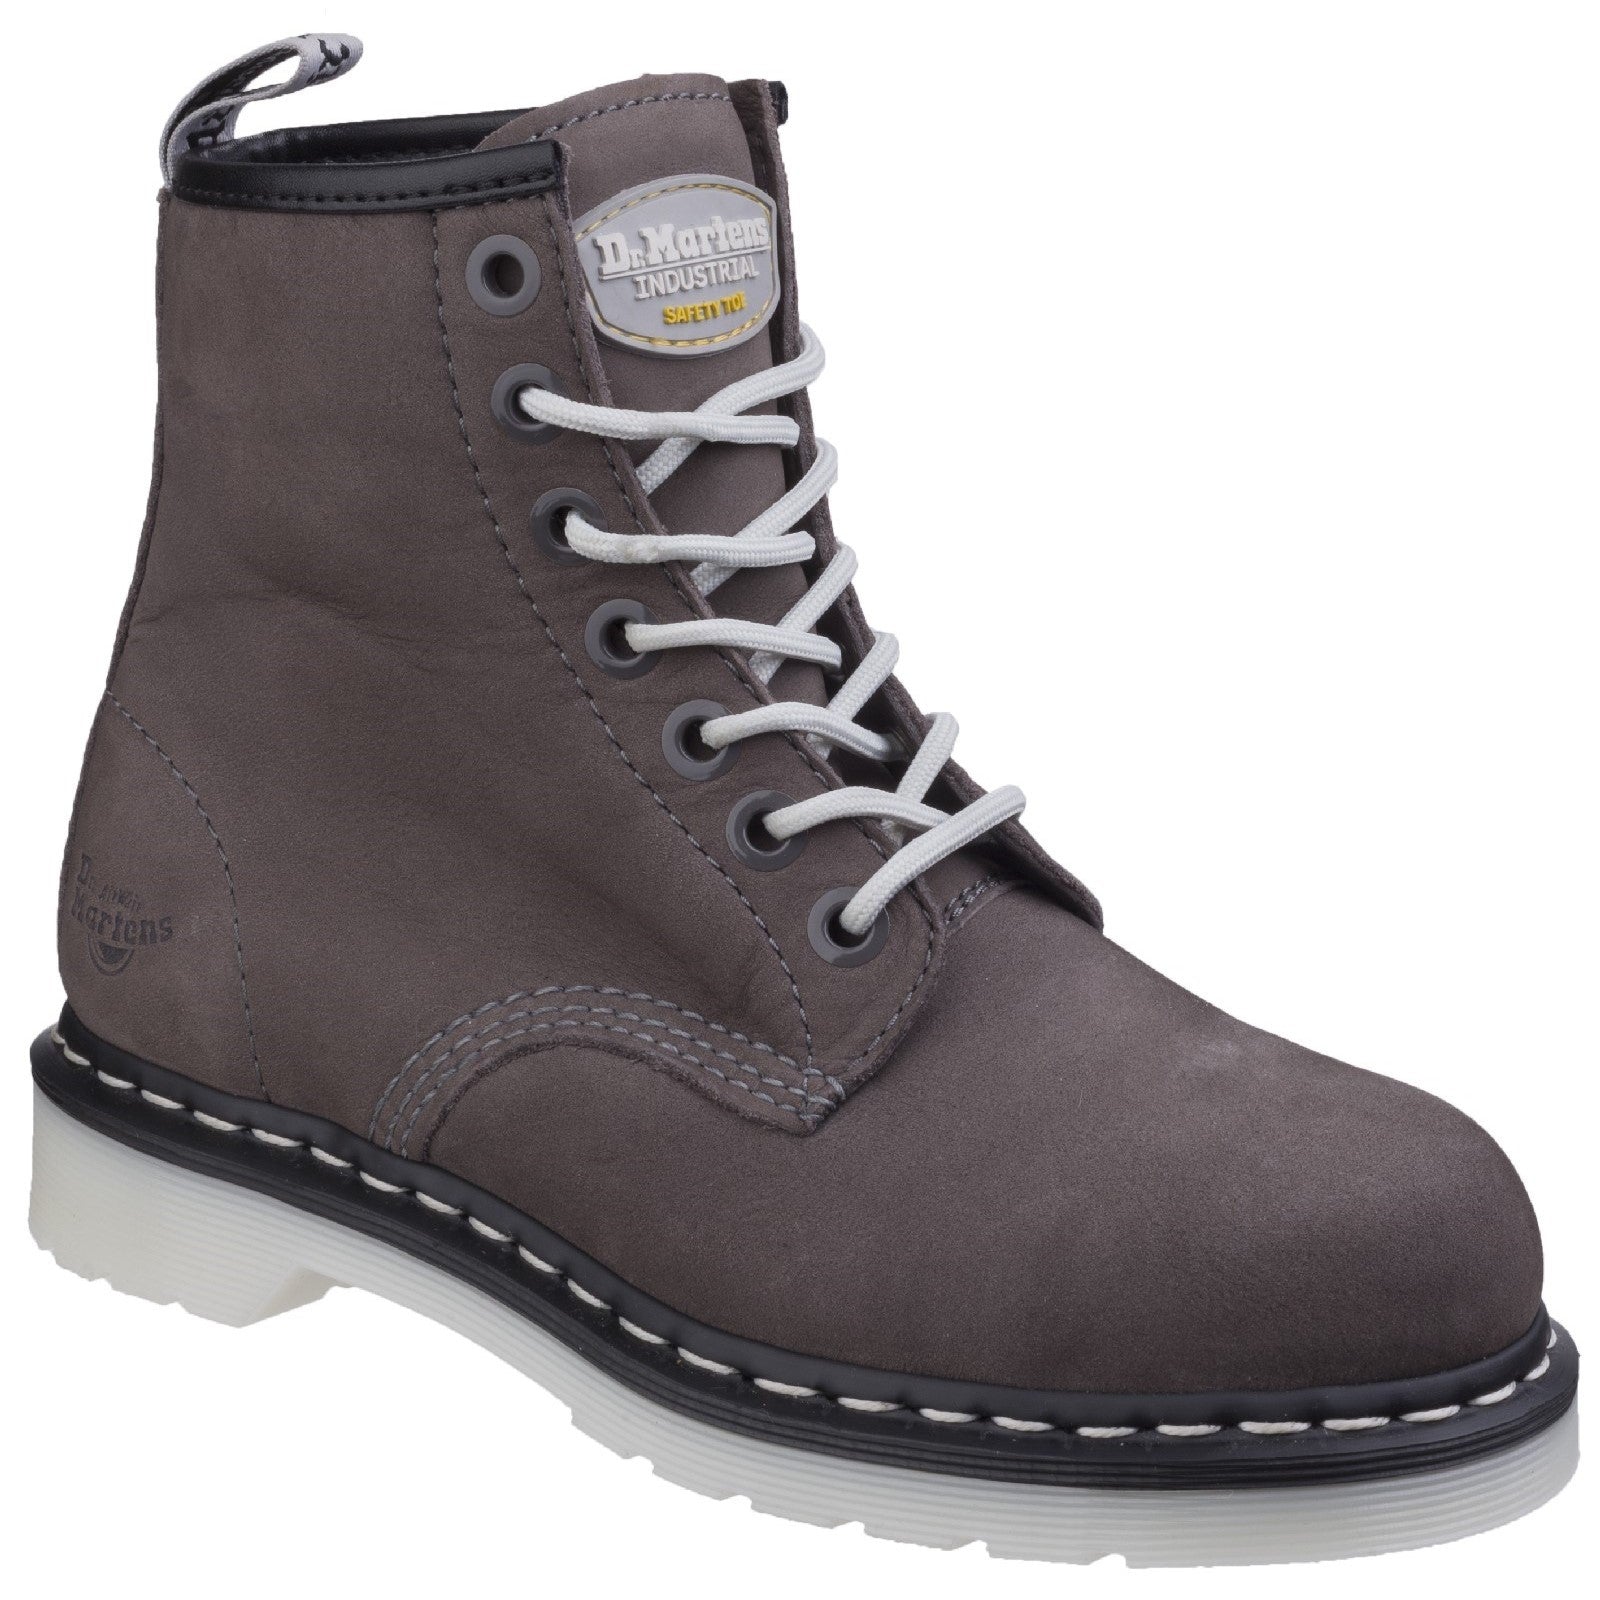 Dr. Martens Maple Classic Steel-Toe Work Boot